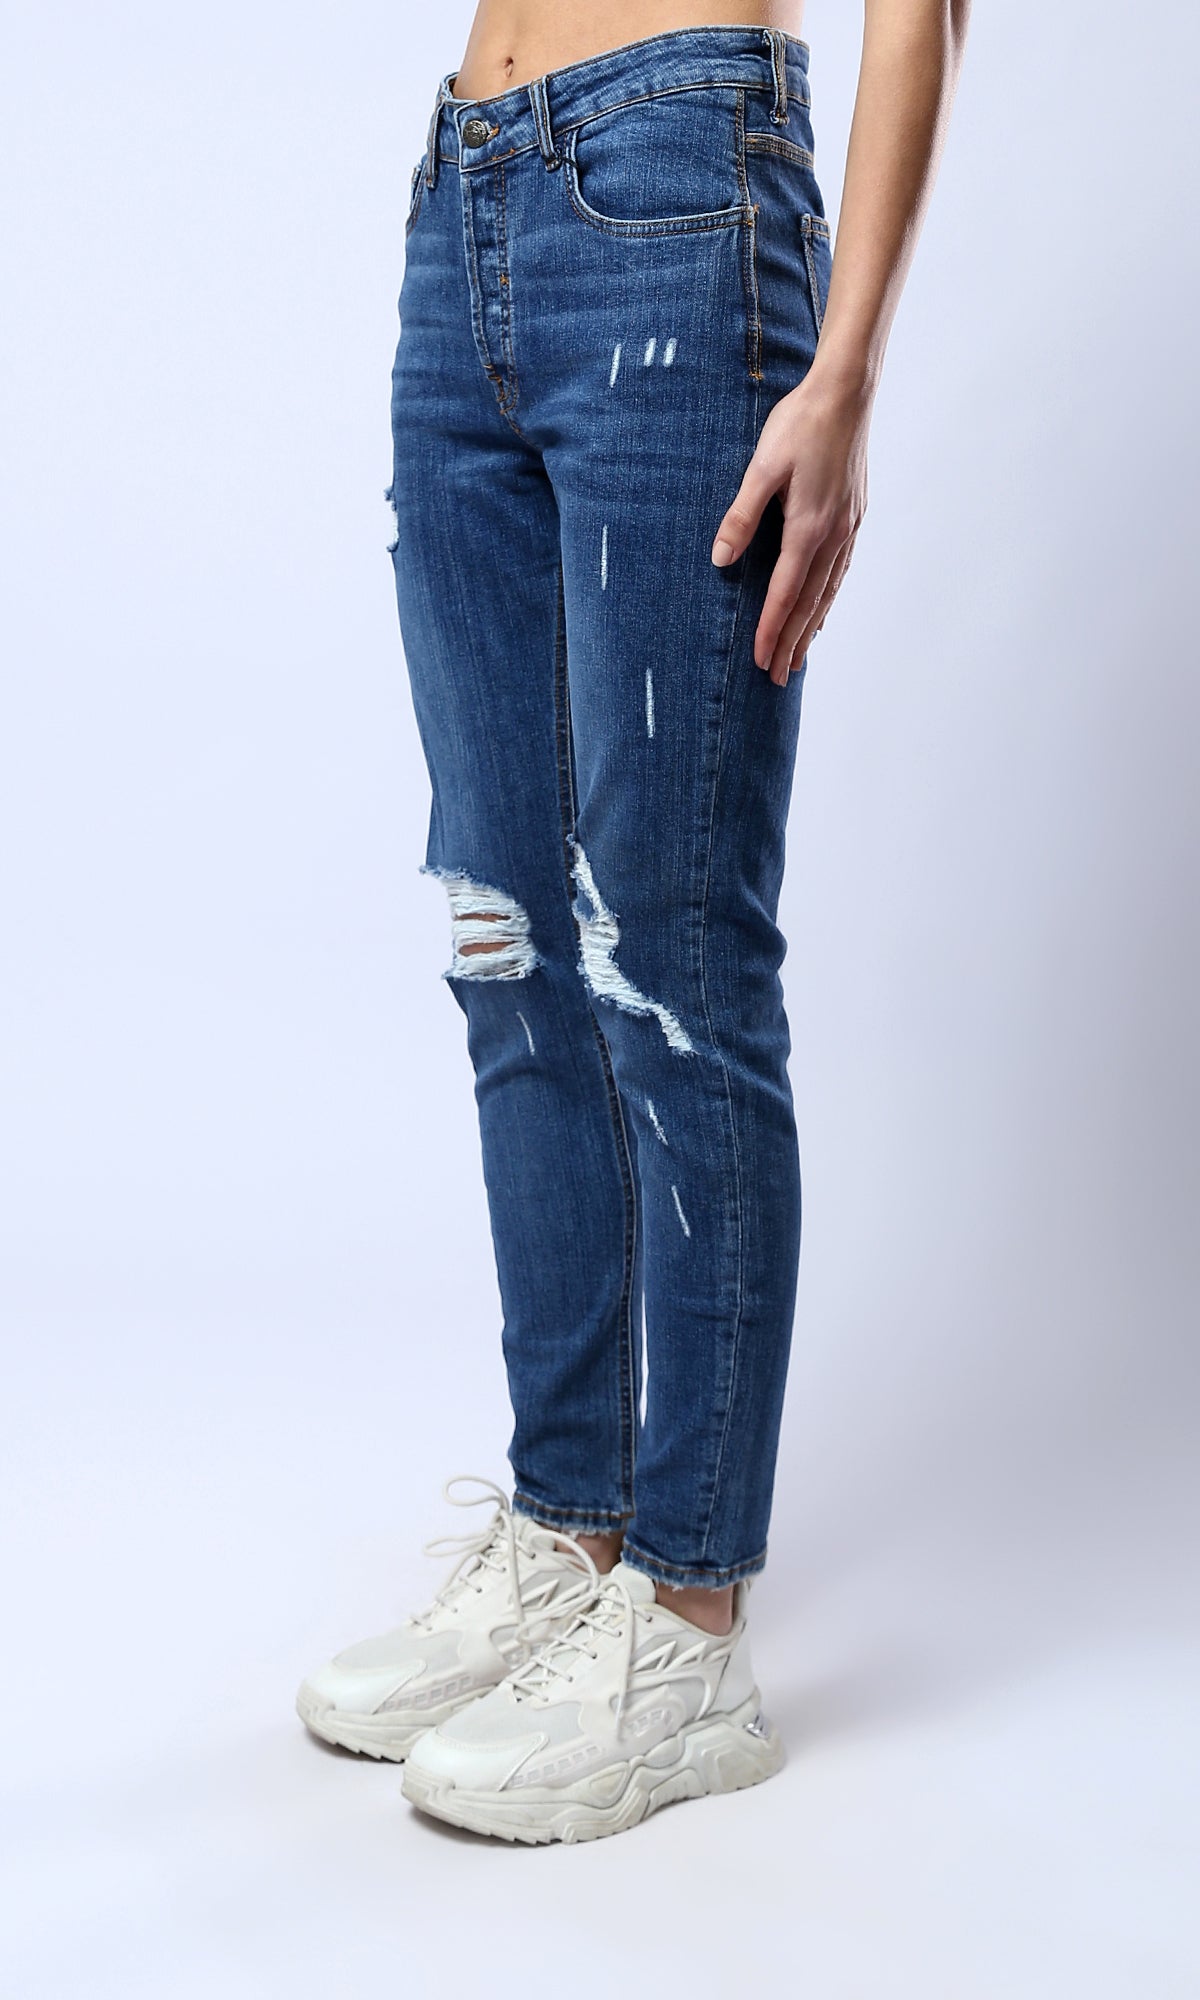 O182214 Standard Blue Casual Ripped Skinny Jeans